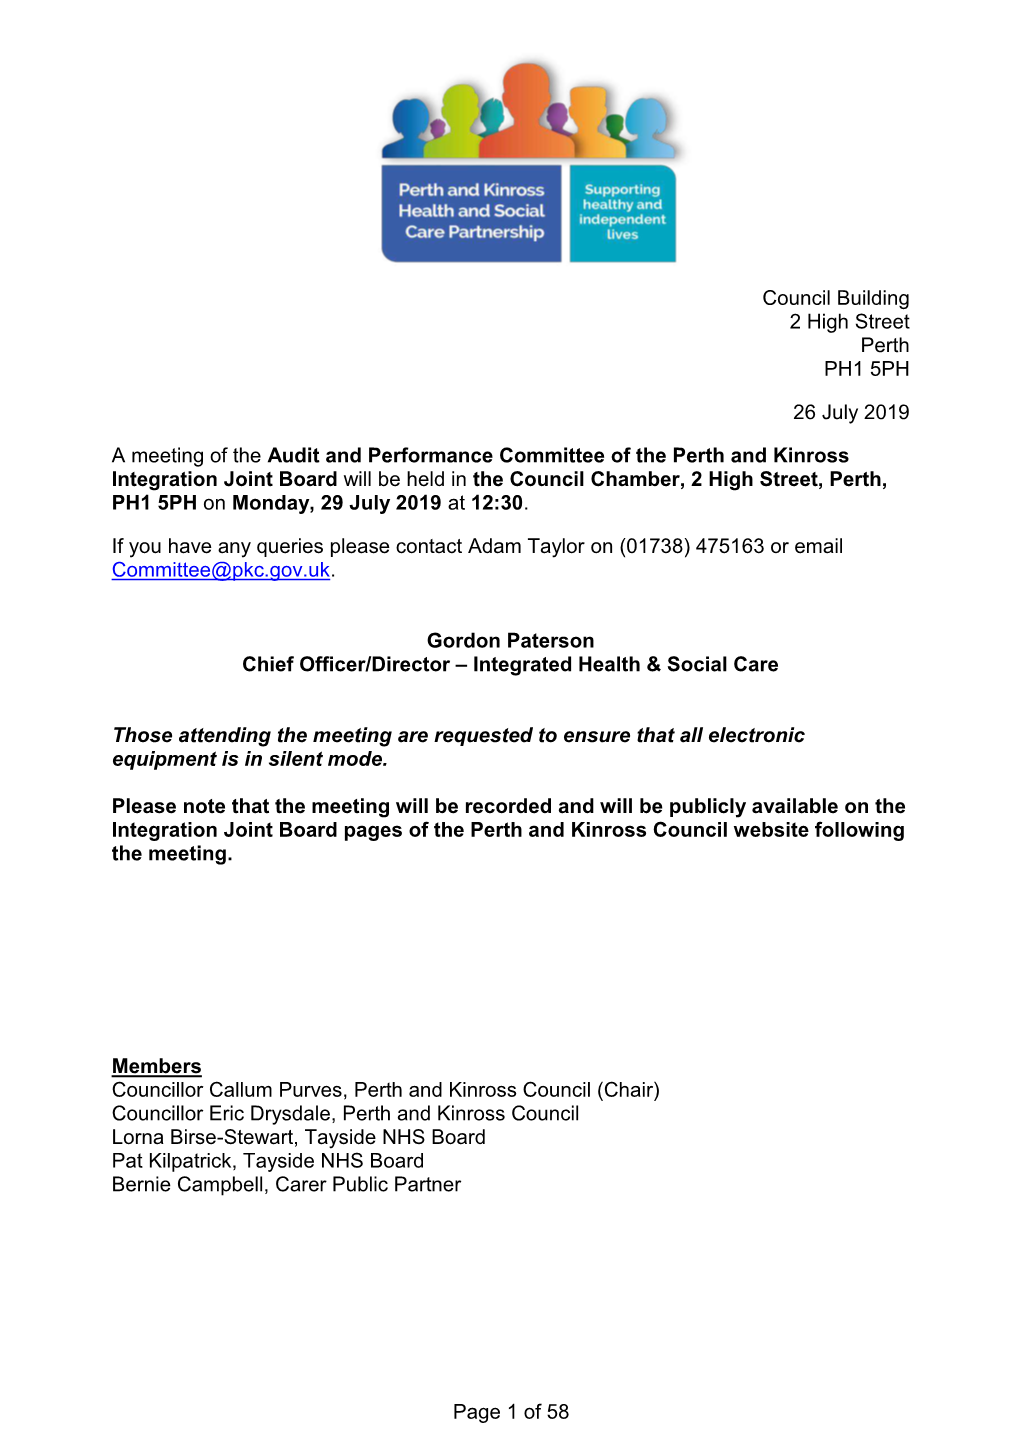 Perth and Kinross Council Website Following the Meeting